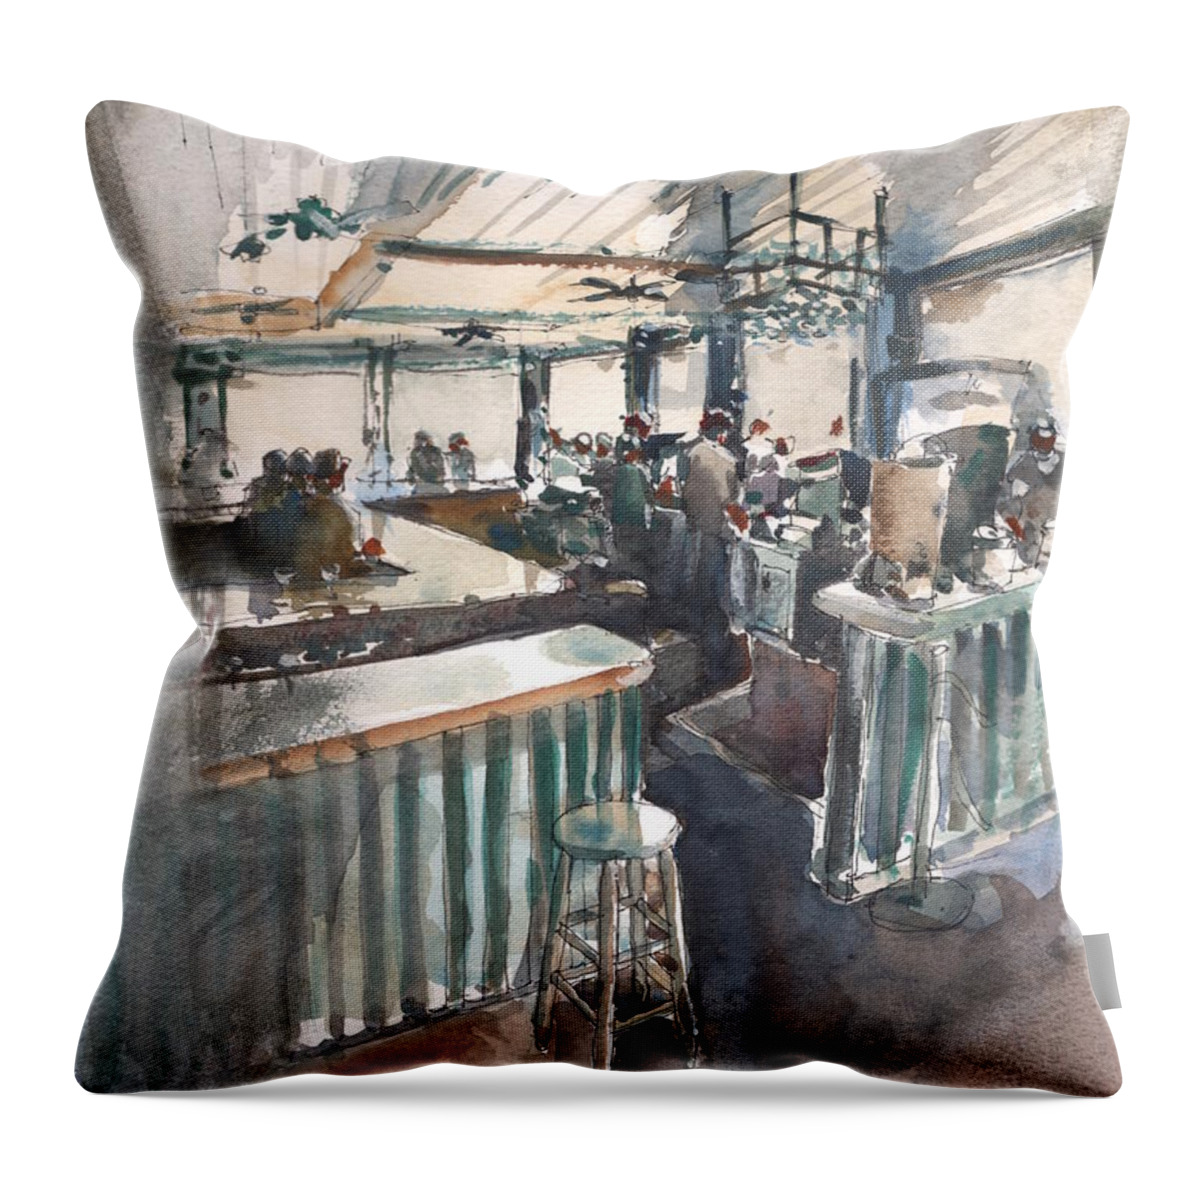 Interior Throw Pillow featuring the painting Clearwater Bar on the Beach by Gaston McKenzie